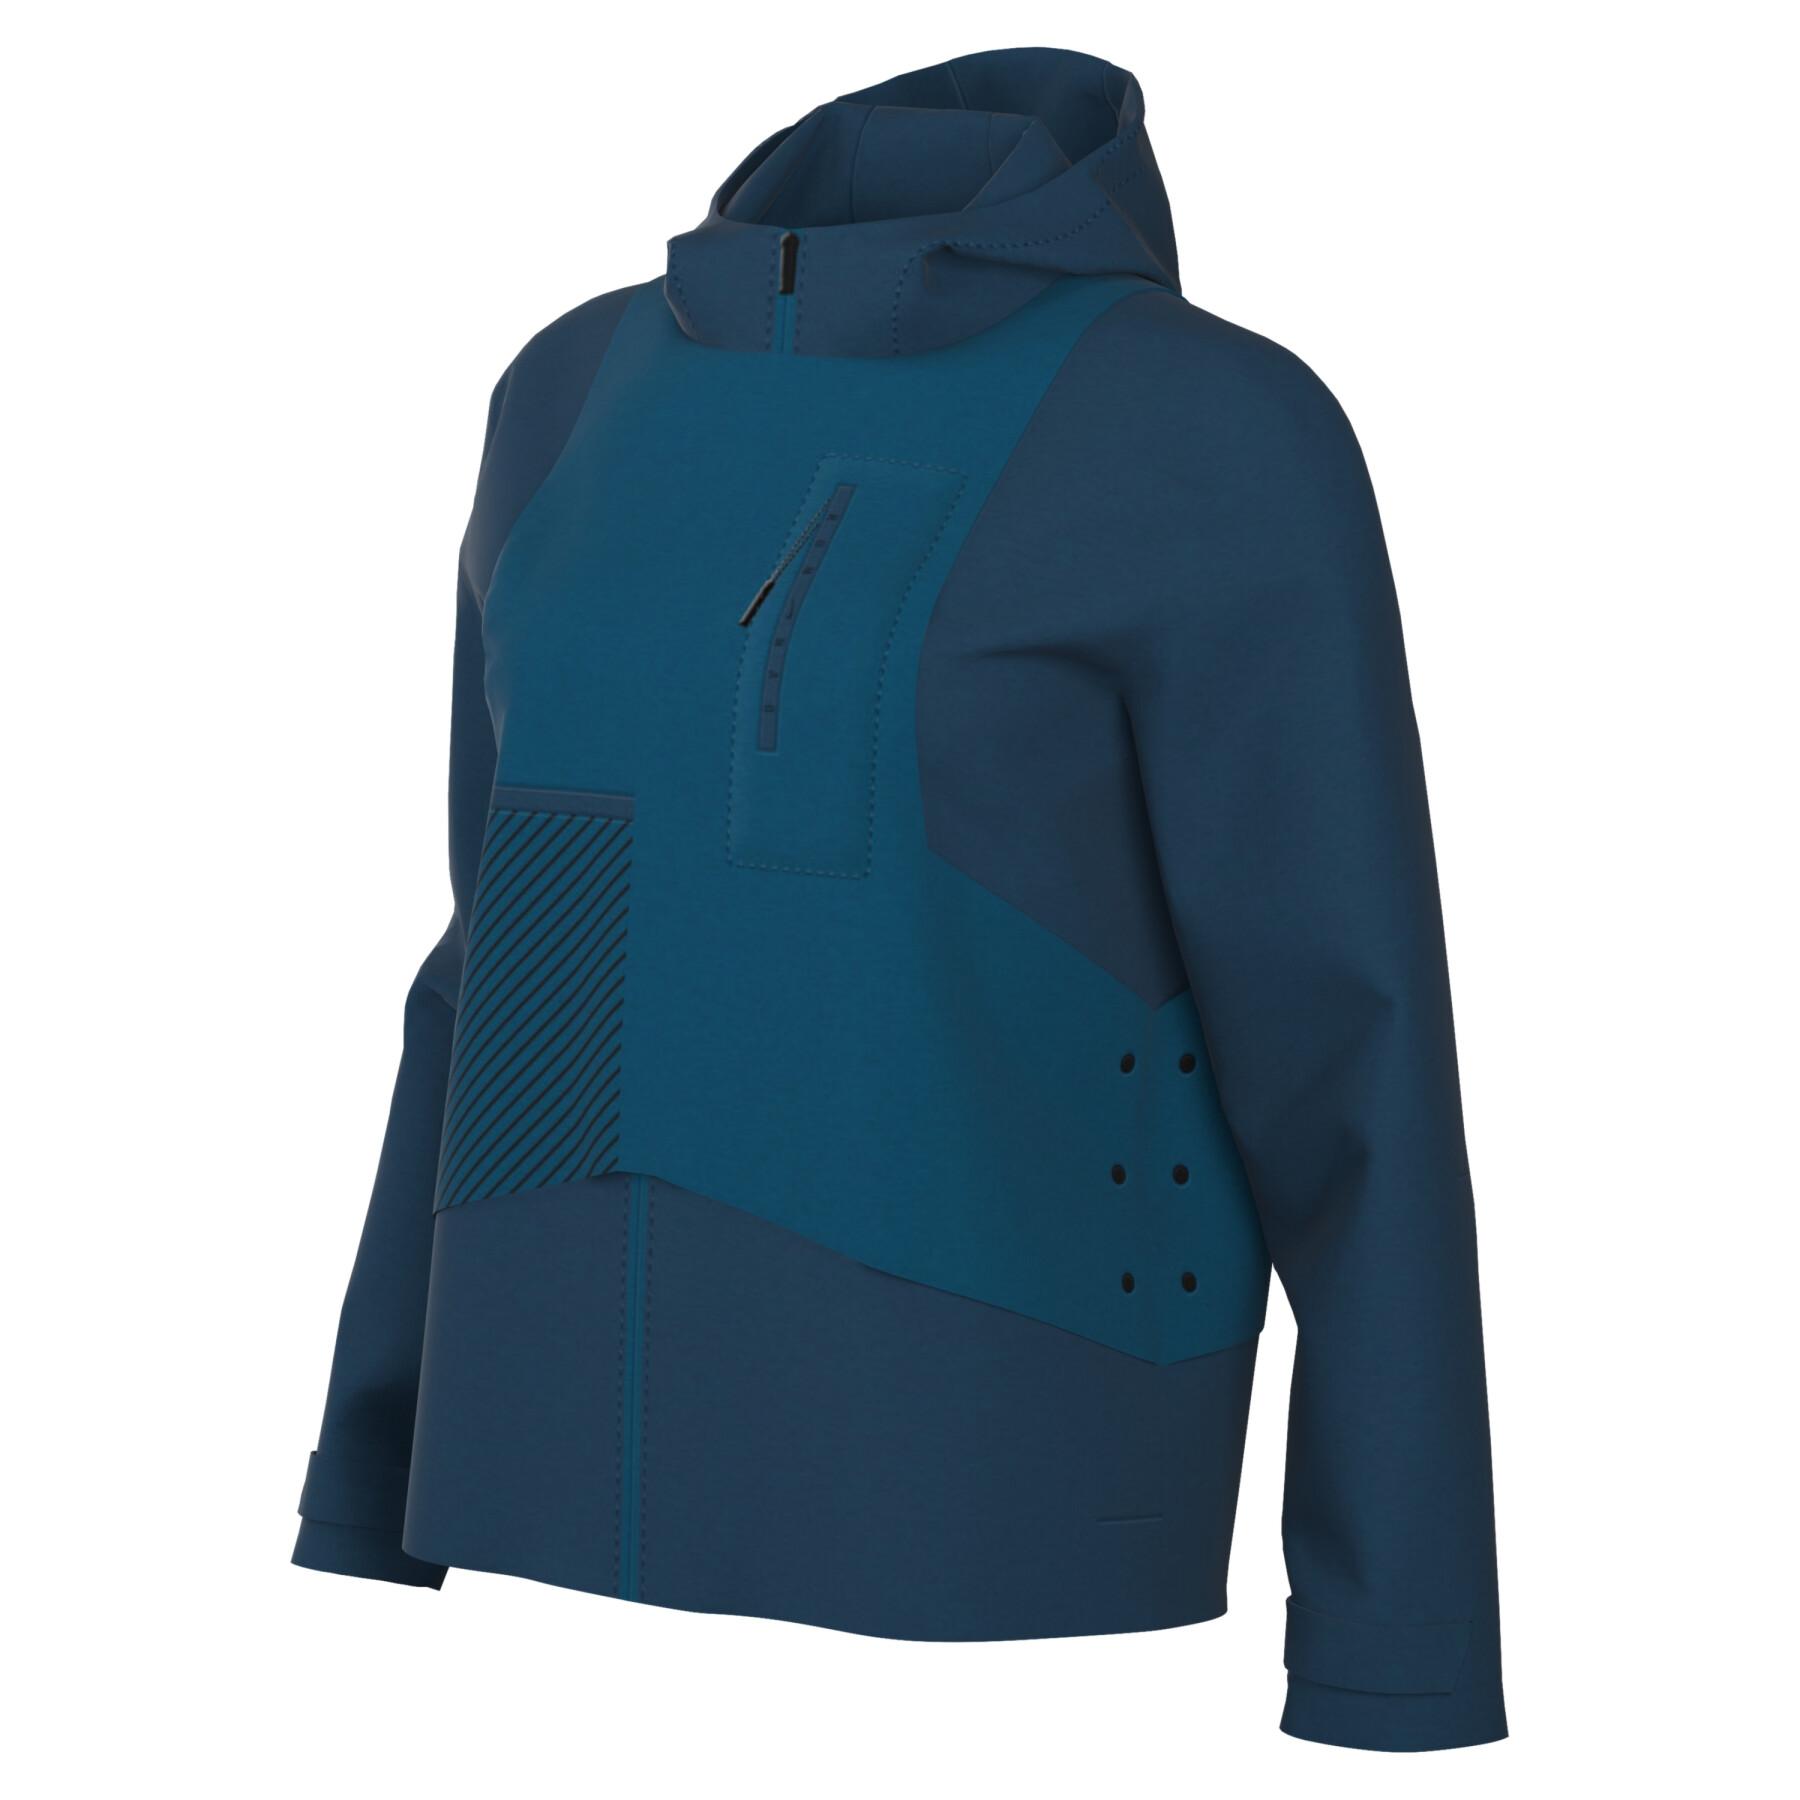 Chaqueta impermeable con cremallera para mujer Nike Storm-FIT Run Division